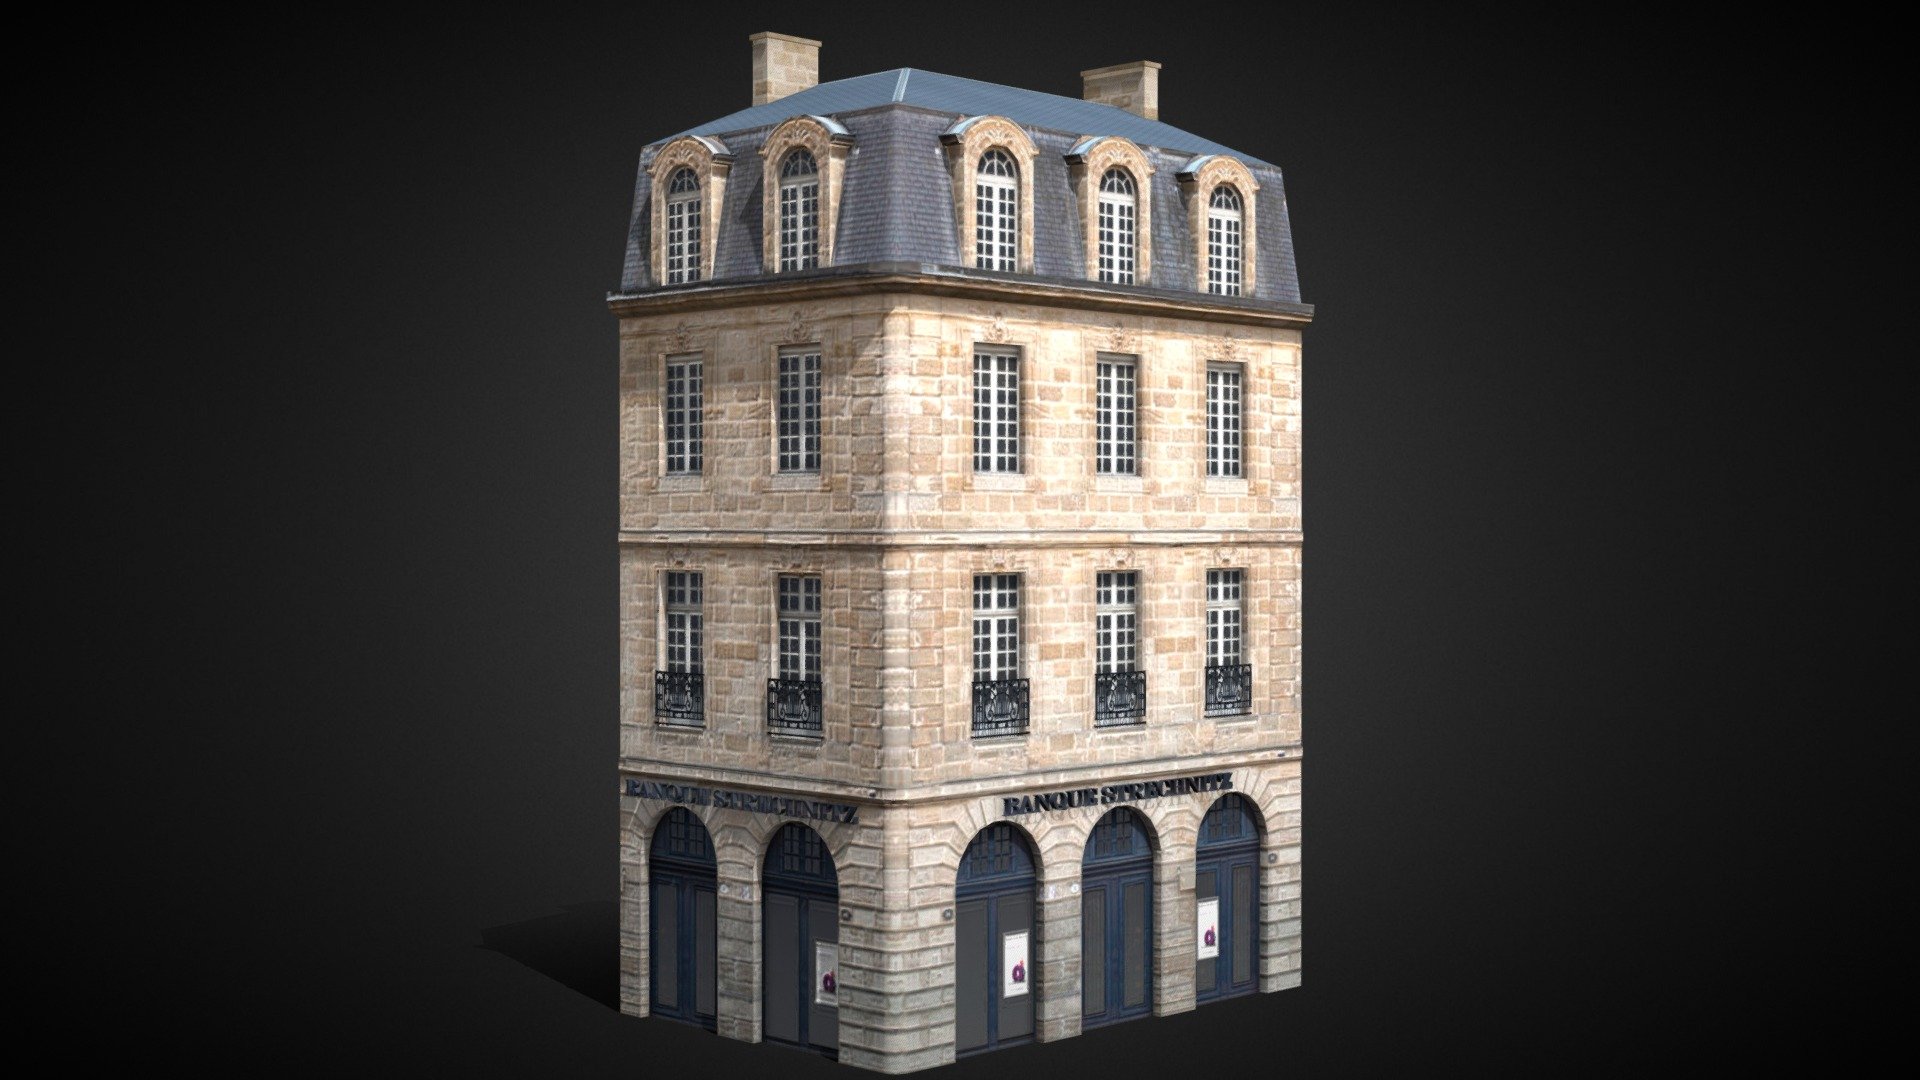 Custom low-poly asset made with Blender and Gimp for the Cities: Skylines video game. Available on the Steam Workshop here: https://steamcommunity.com/sharedfiles/filedetails/?id=1873911748 - Bordeaux Flat 1 corner [France] - Download Free 3D model by Lost Gecko (@Lost_Gecko) 3d model